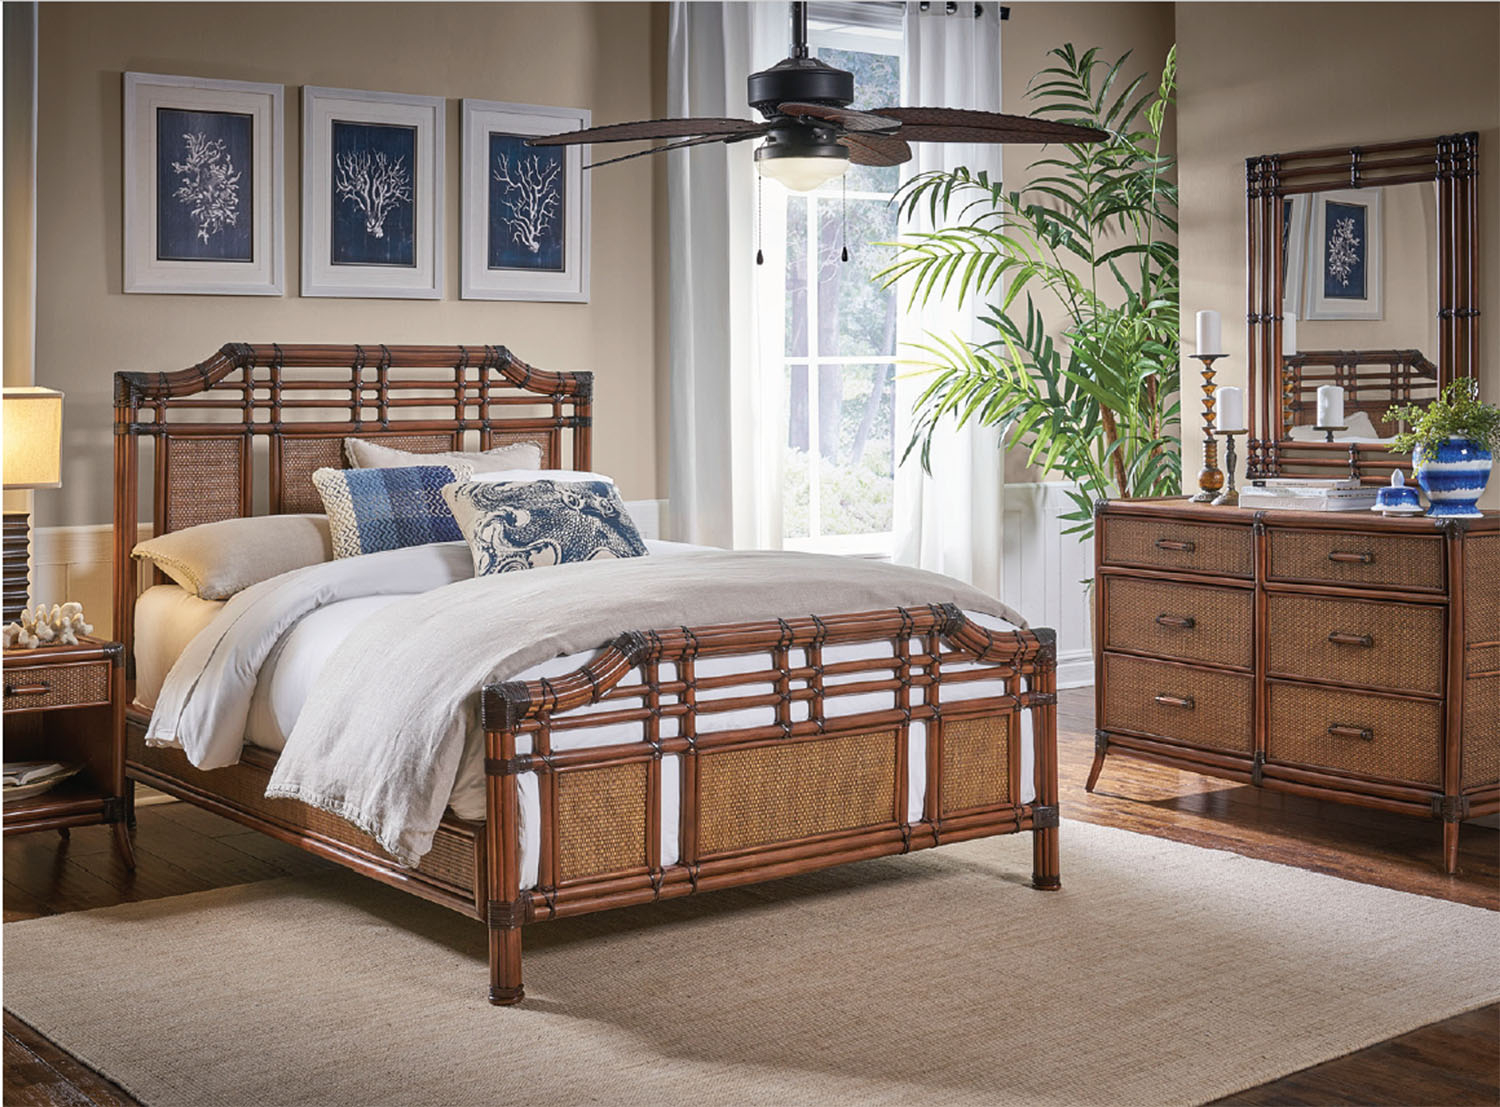 Palm Cove 6 Piece Queen Rattan Wicker Bedroom Set Model 1102 5643 Atq 6bq From Panama Jack with sizing 1500 X 1107